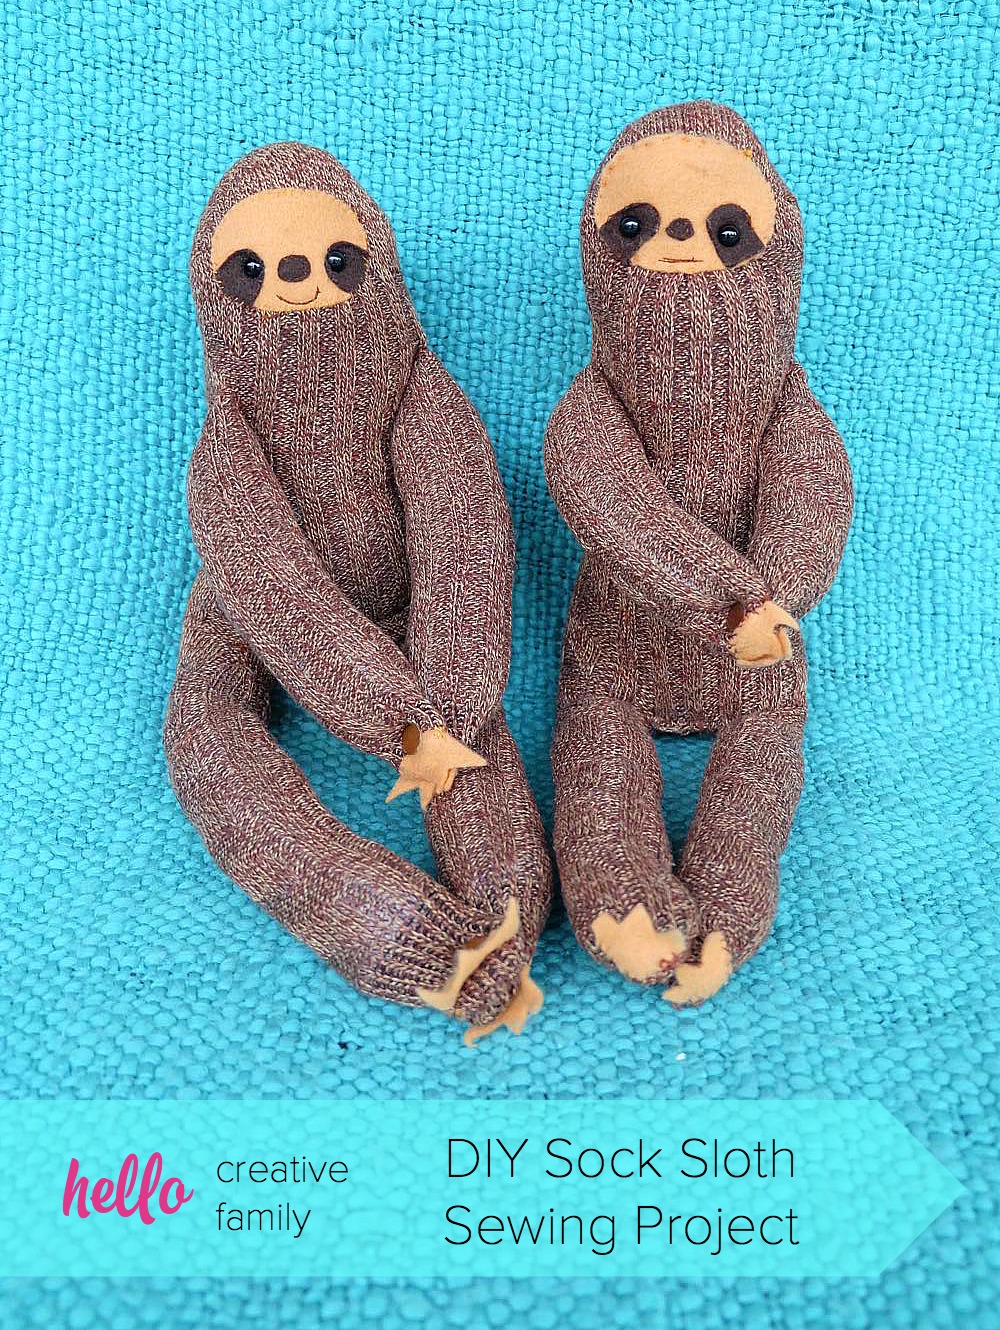 How sweet our these little DIY Sock Sloths? This would be the cutest handmade gift idea for a child or baby. Their hands have snaps so they can hang! Cut up a pair of socks and make one! DIY Sock Sloth Sewing Project on Hello Creative Family.